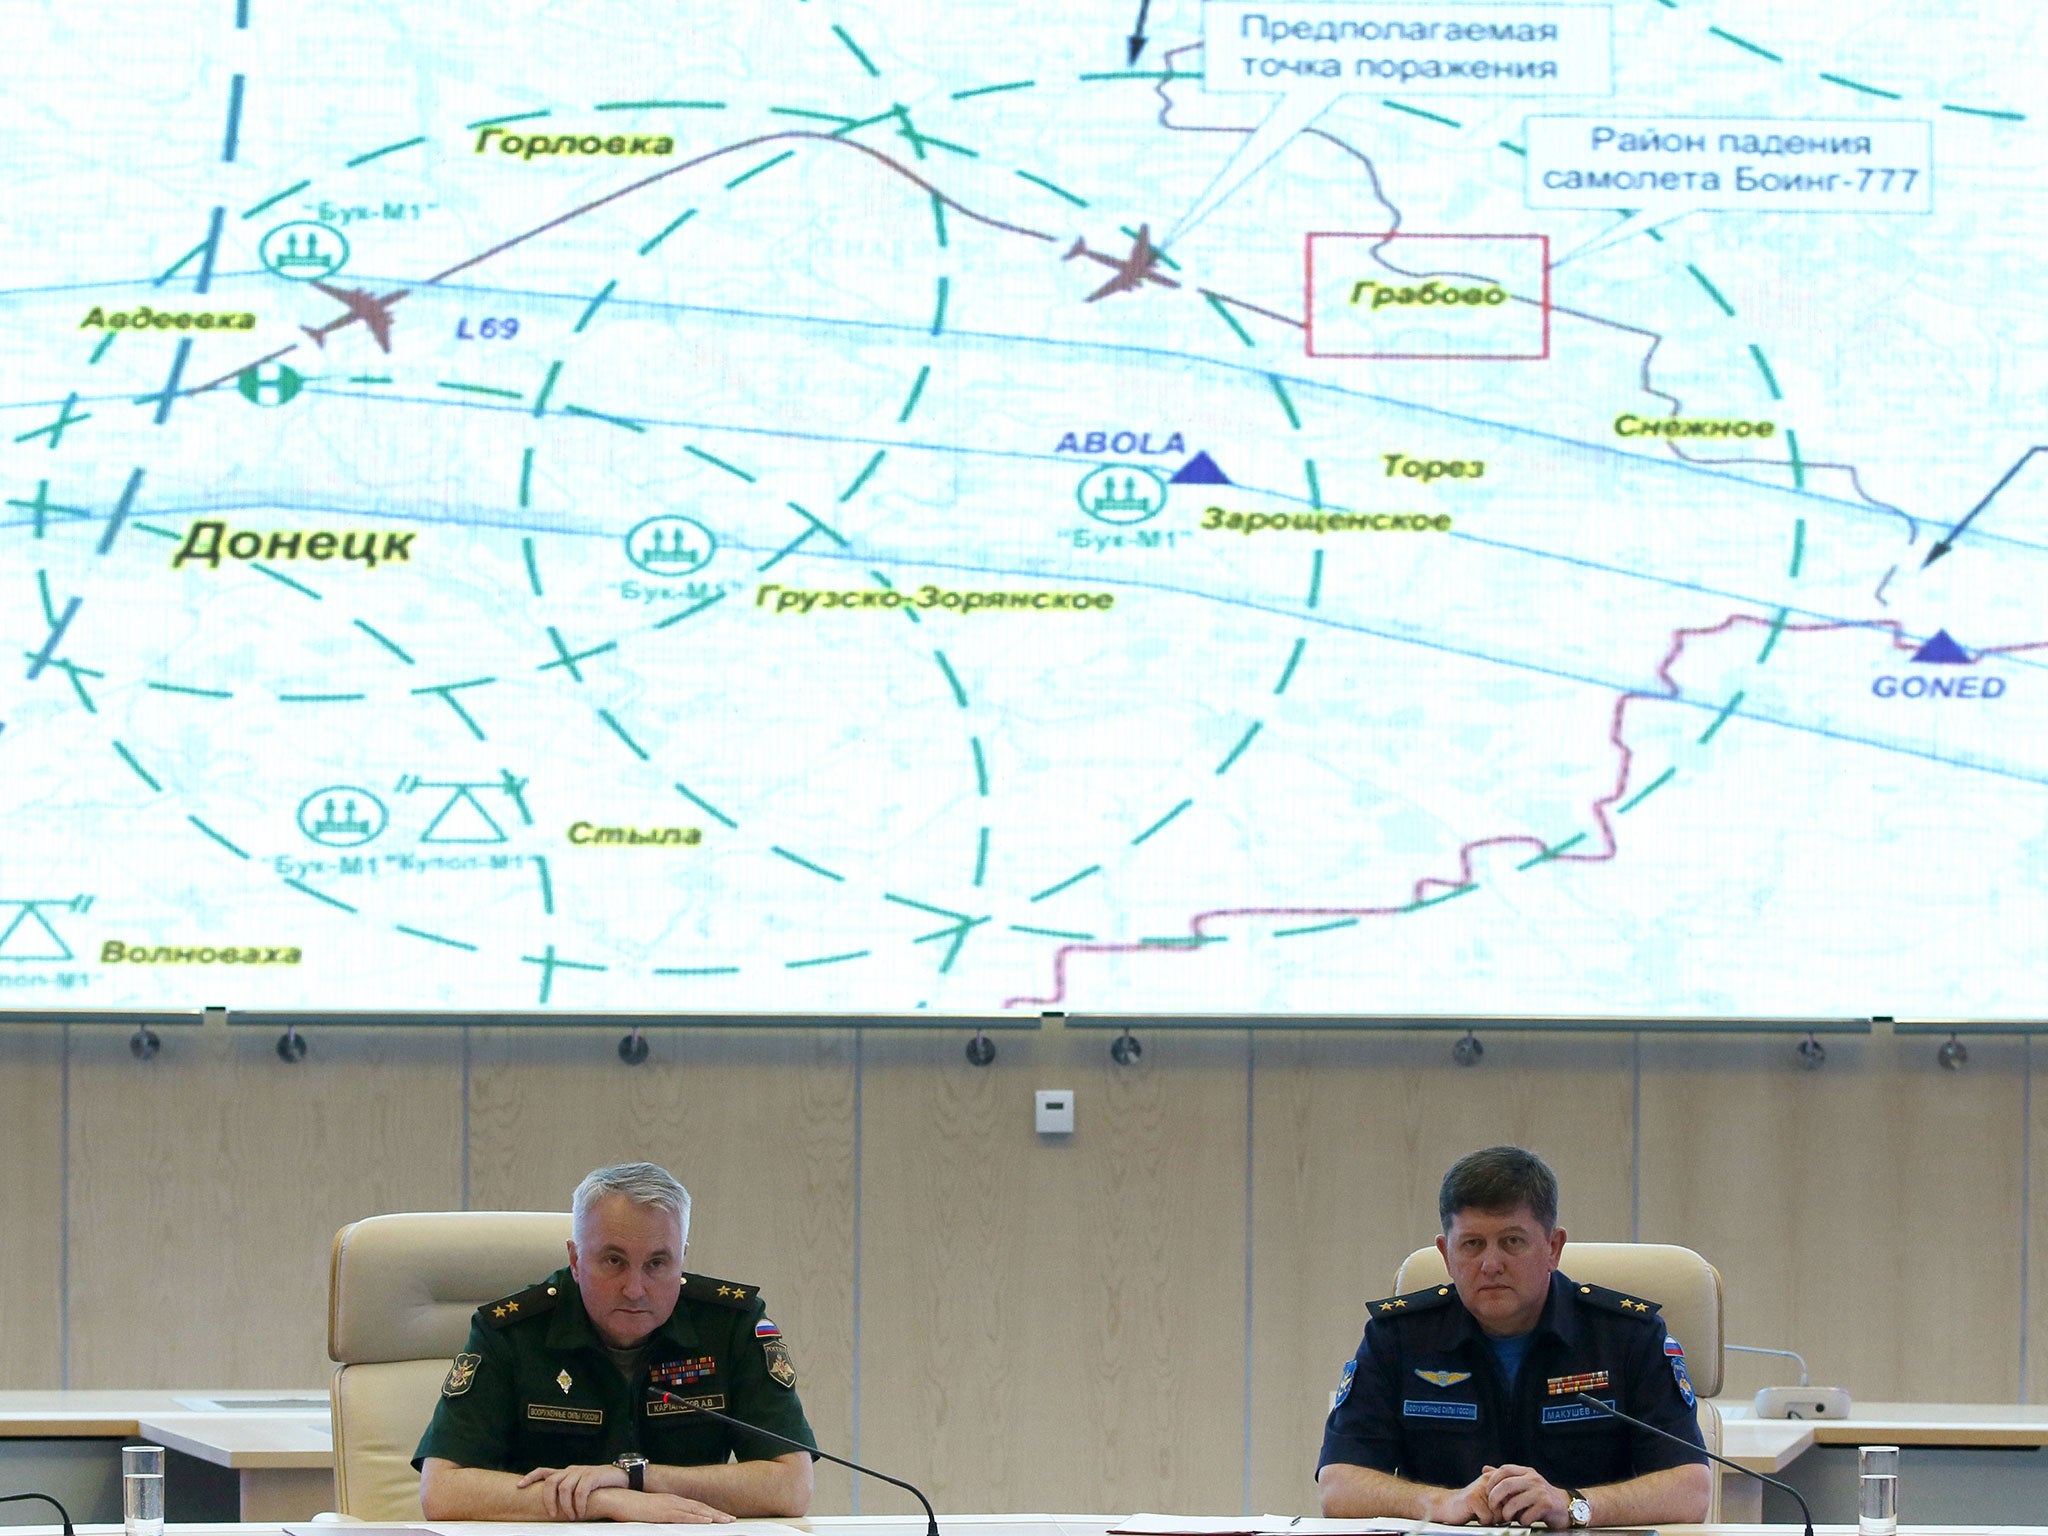 A map of the placement of air defense in the area of Donetsk is shown on the screen during a briefing by Lieutenant-General Andrei Kartopolov, Head of the Main Operative Department of the Russian General Staff, left, and Lieutenant-General Igor Makushev, 